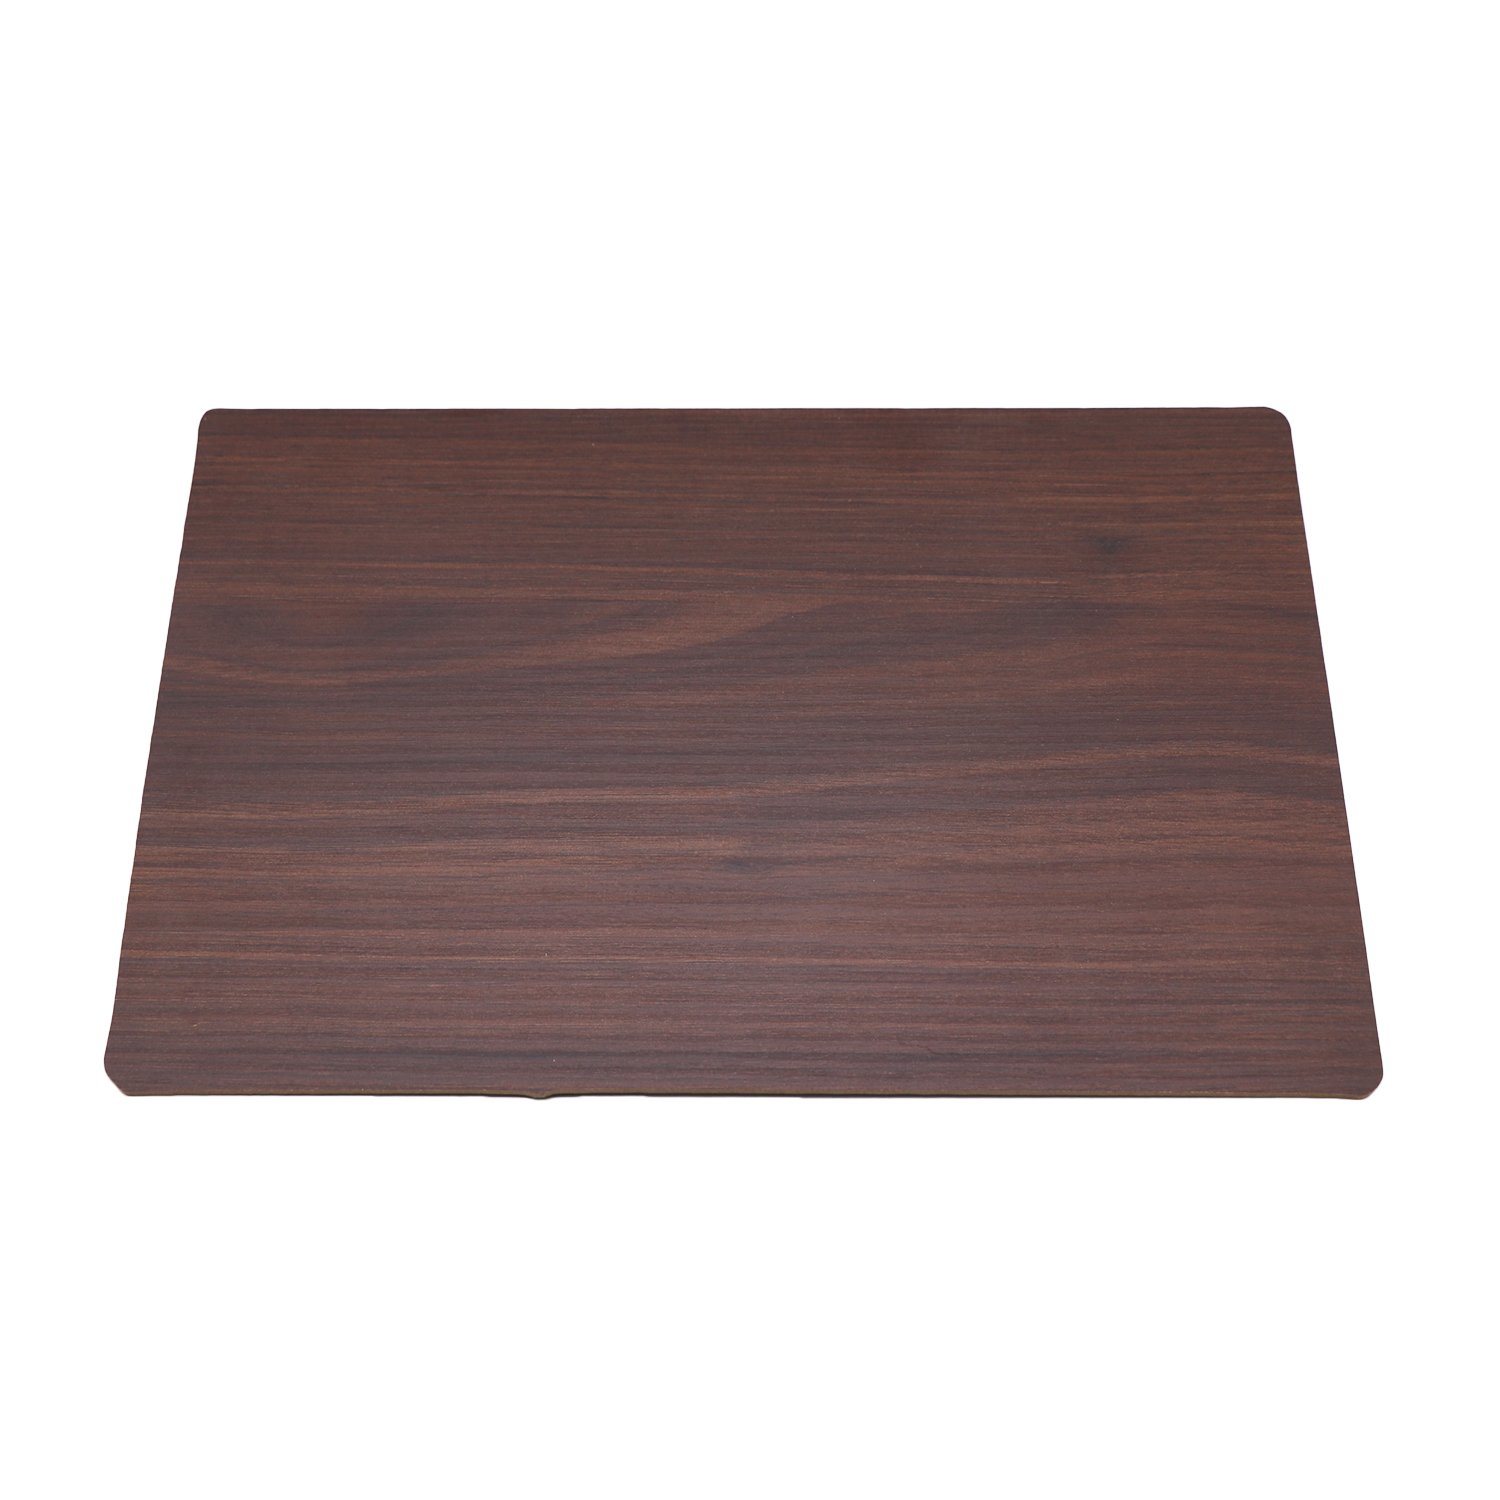 Factory Supply Raw Plain Texture Melamine Faced MDF with Cheap Price for Furniture Decorative